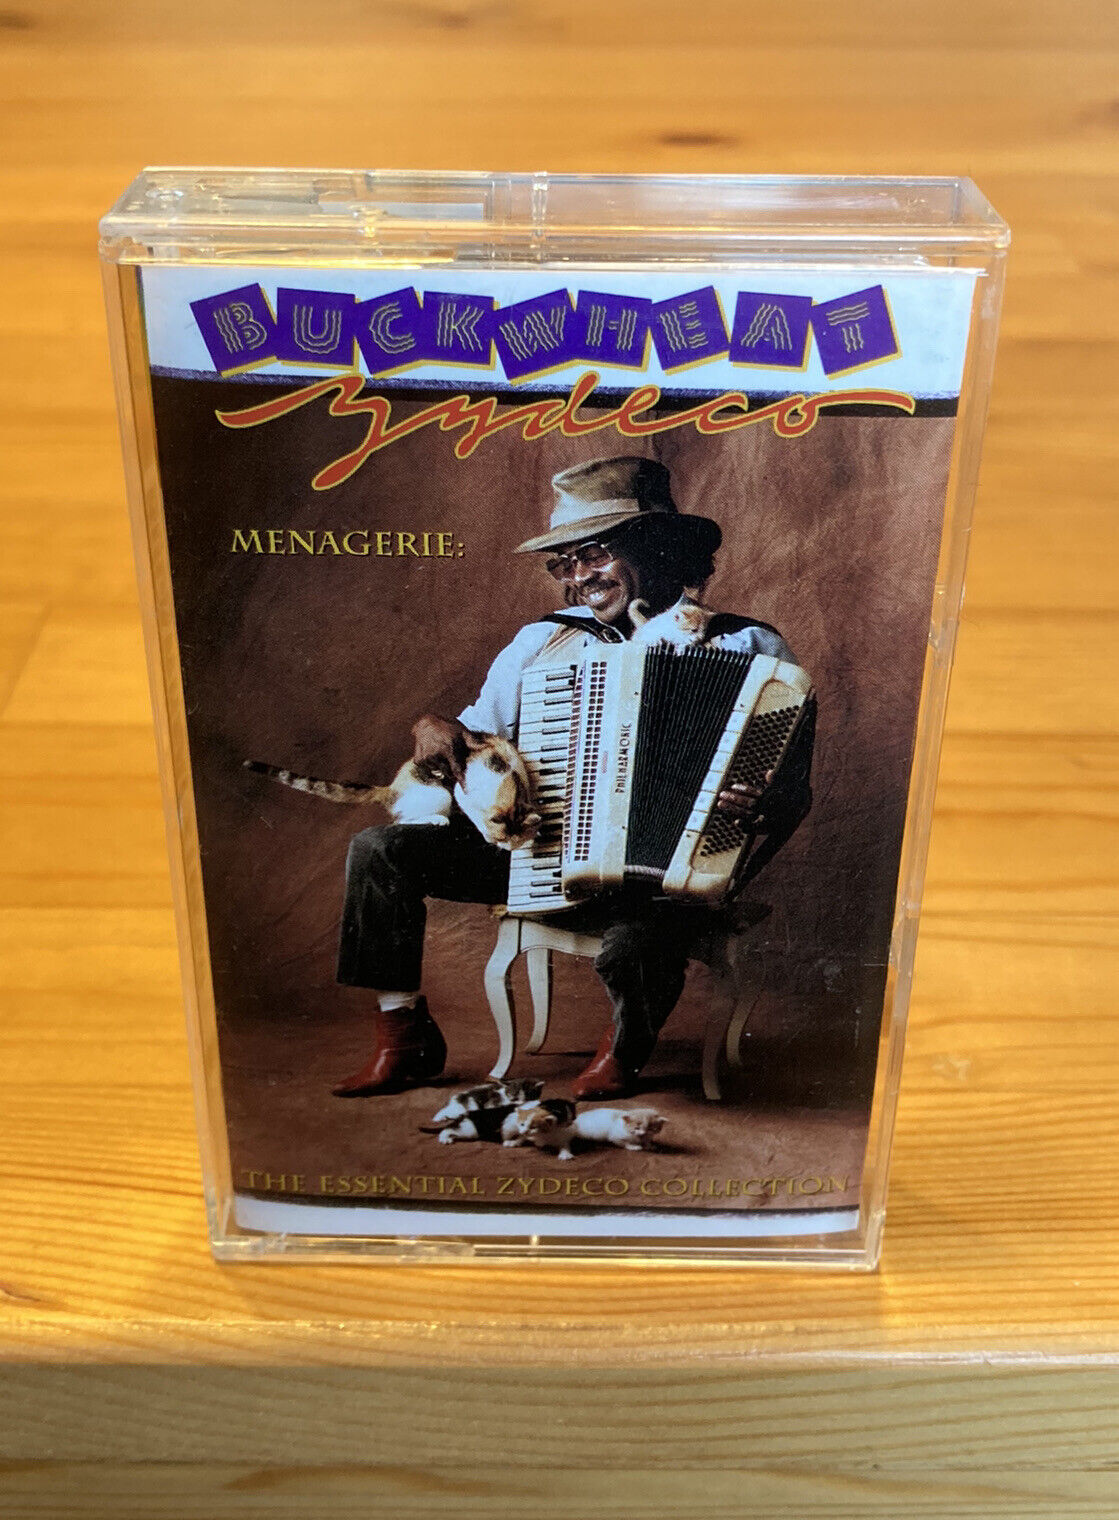 Vtg 1993 Menagerie Essential Collection BUCKWHEAT ZYDECO Cassette Tape Mango 90s